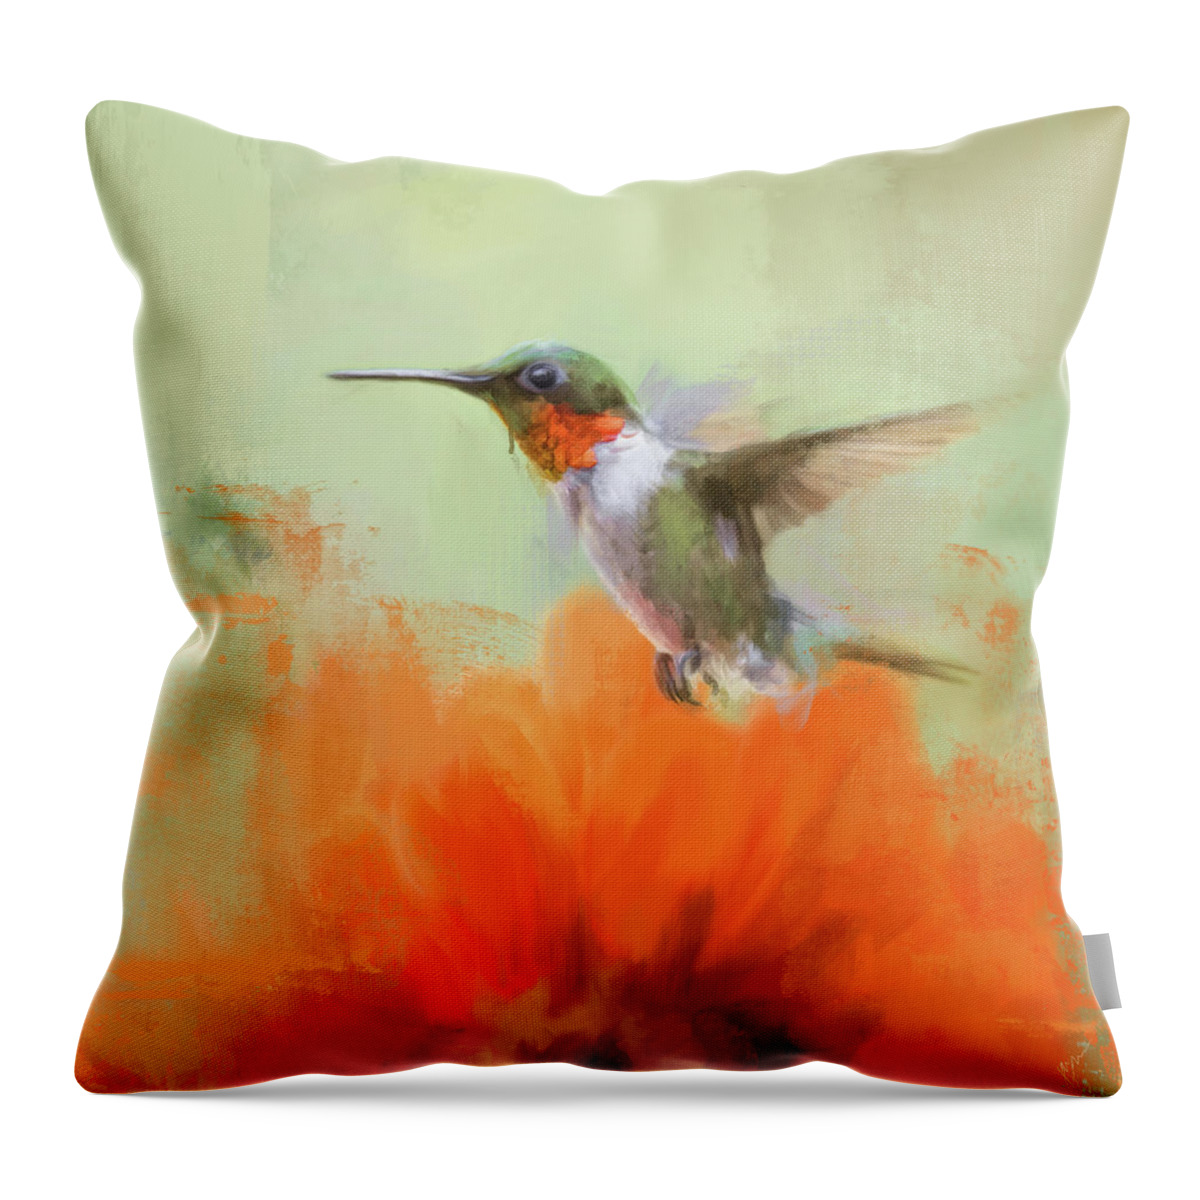 Colorful Throw Pillow featuring the painting Garden Beauty by Jai Johnson